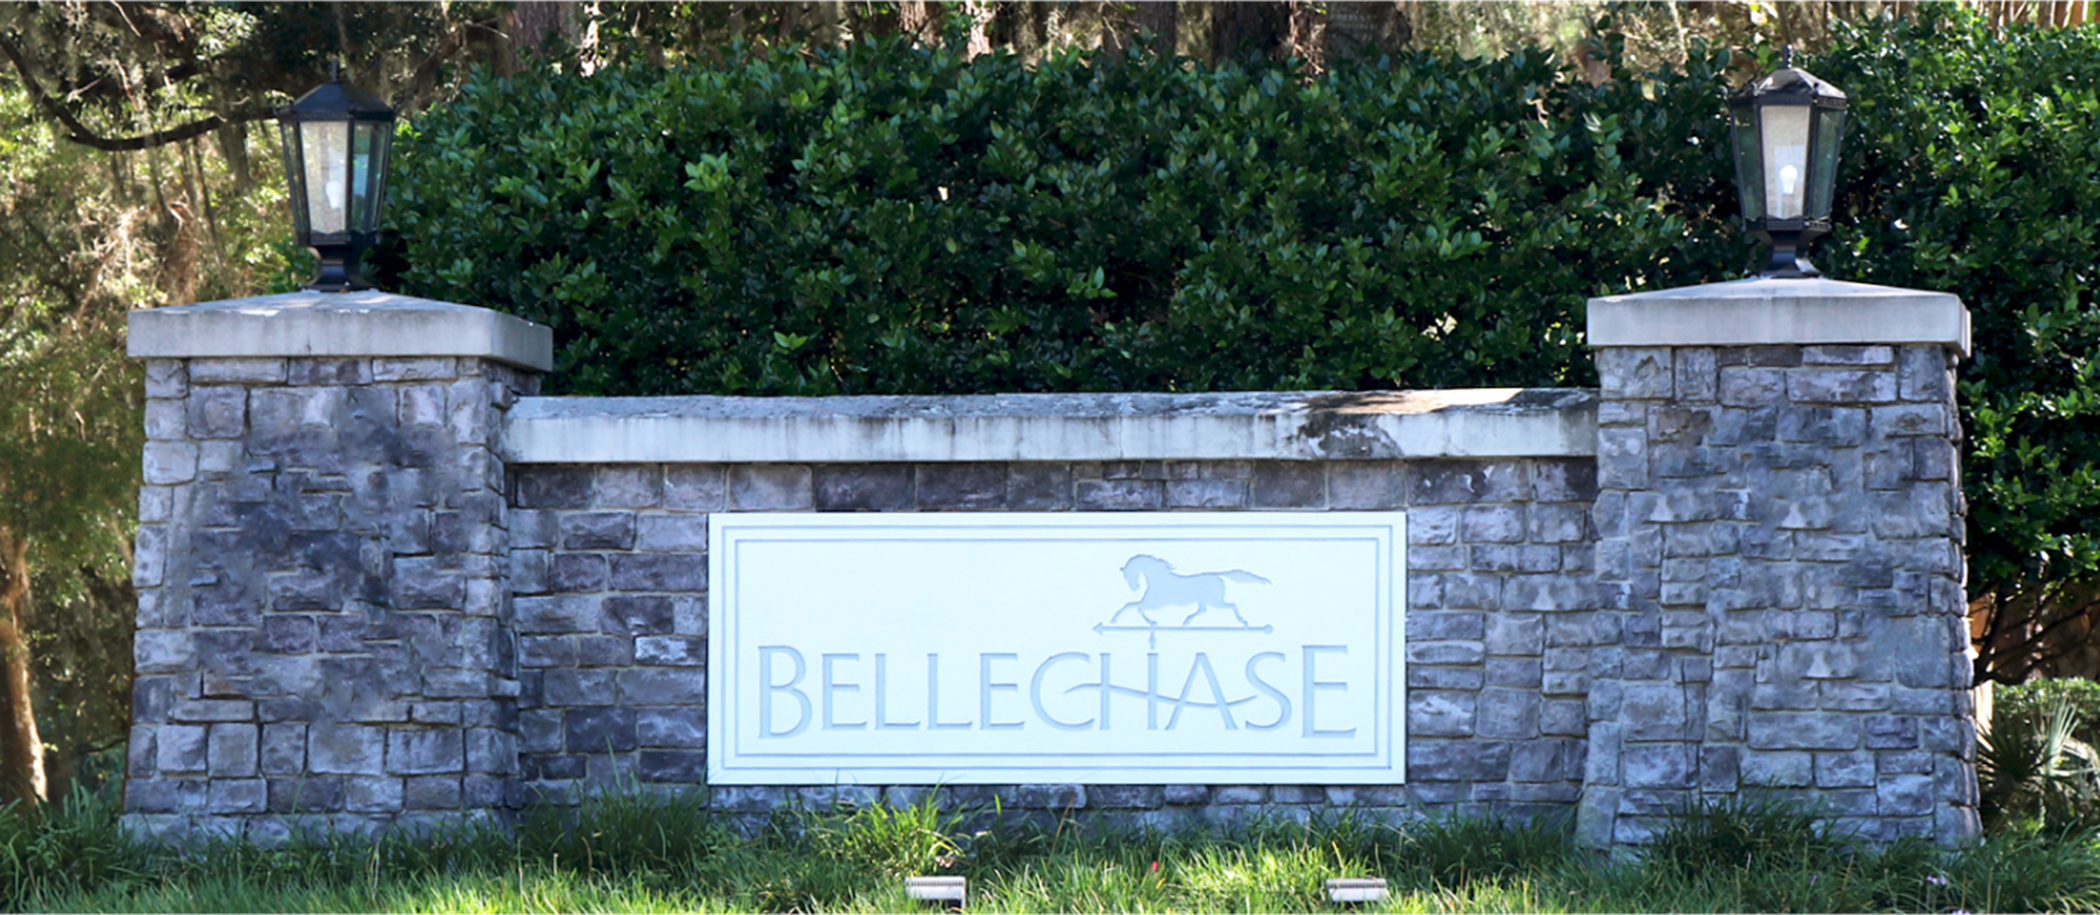 Bellechase monument sign